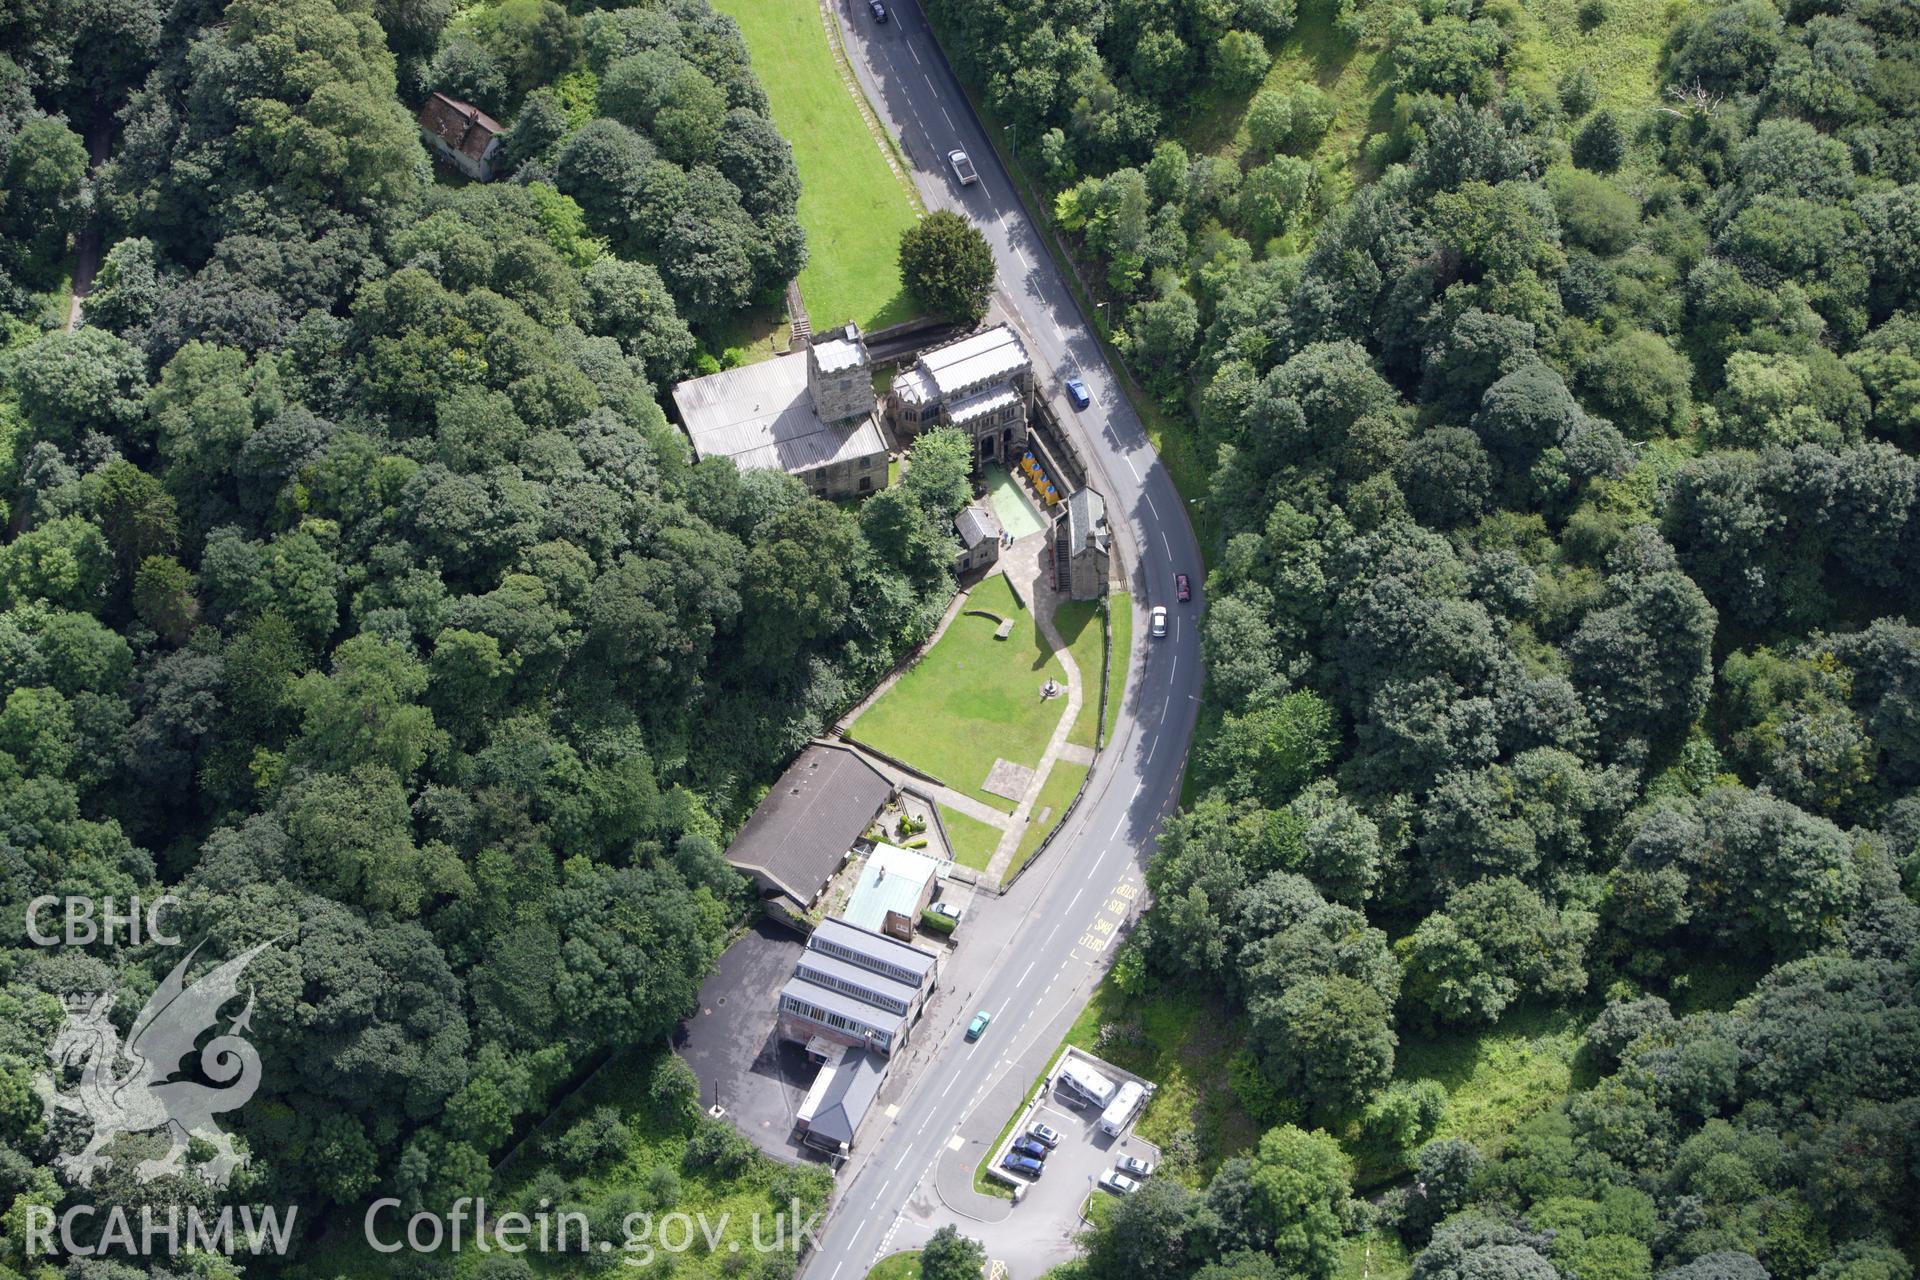 RCAHMW colour oblique aerial photograph of St Winifride's Well and Well Chapel. Taken on 30 July 2009 by Toby Driver